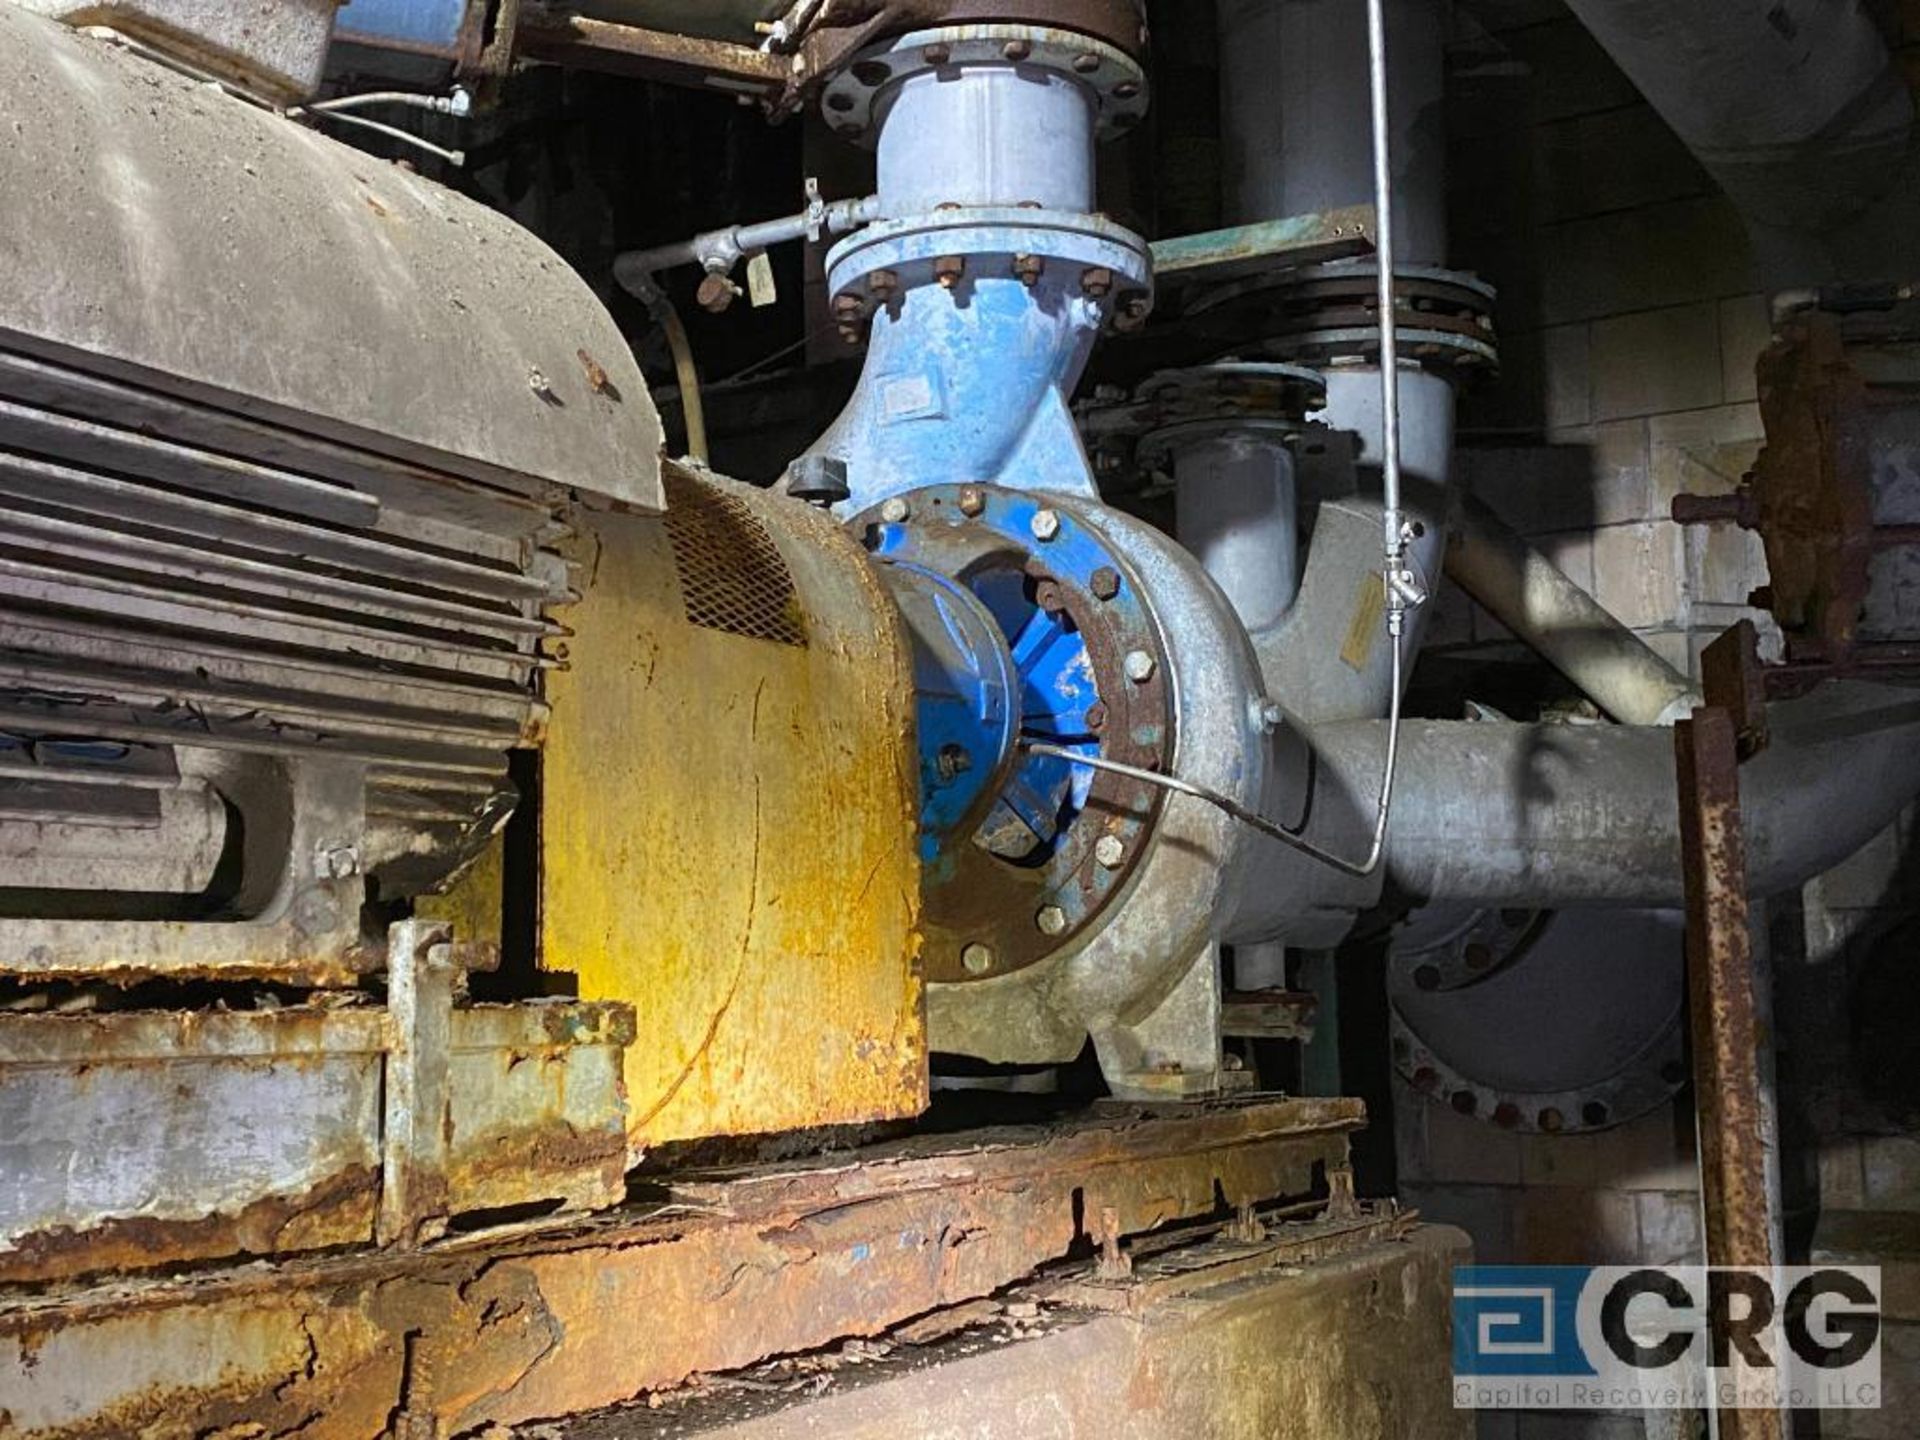 Goulds 14 X 14 -22 316 centrifugal pump with 350 HP drive, (Location: Under RNP)